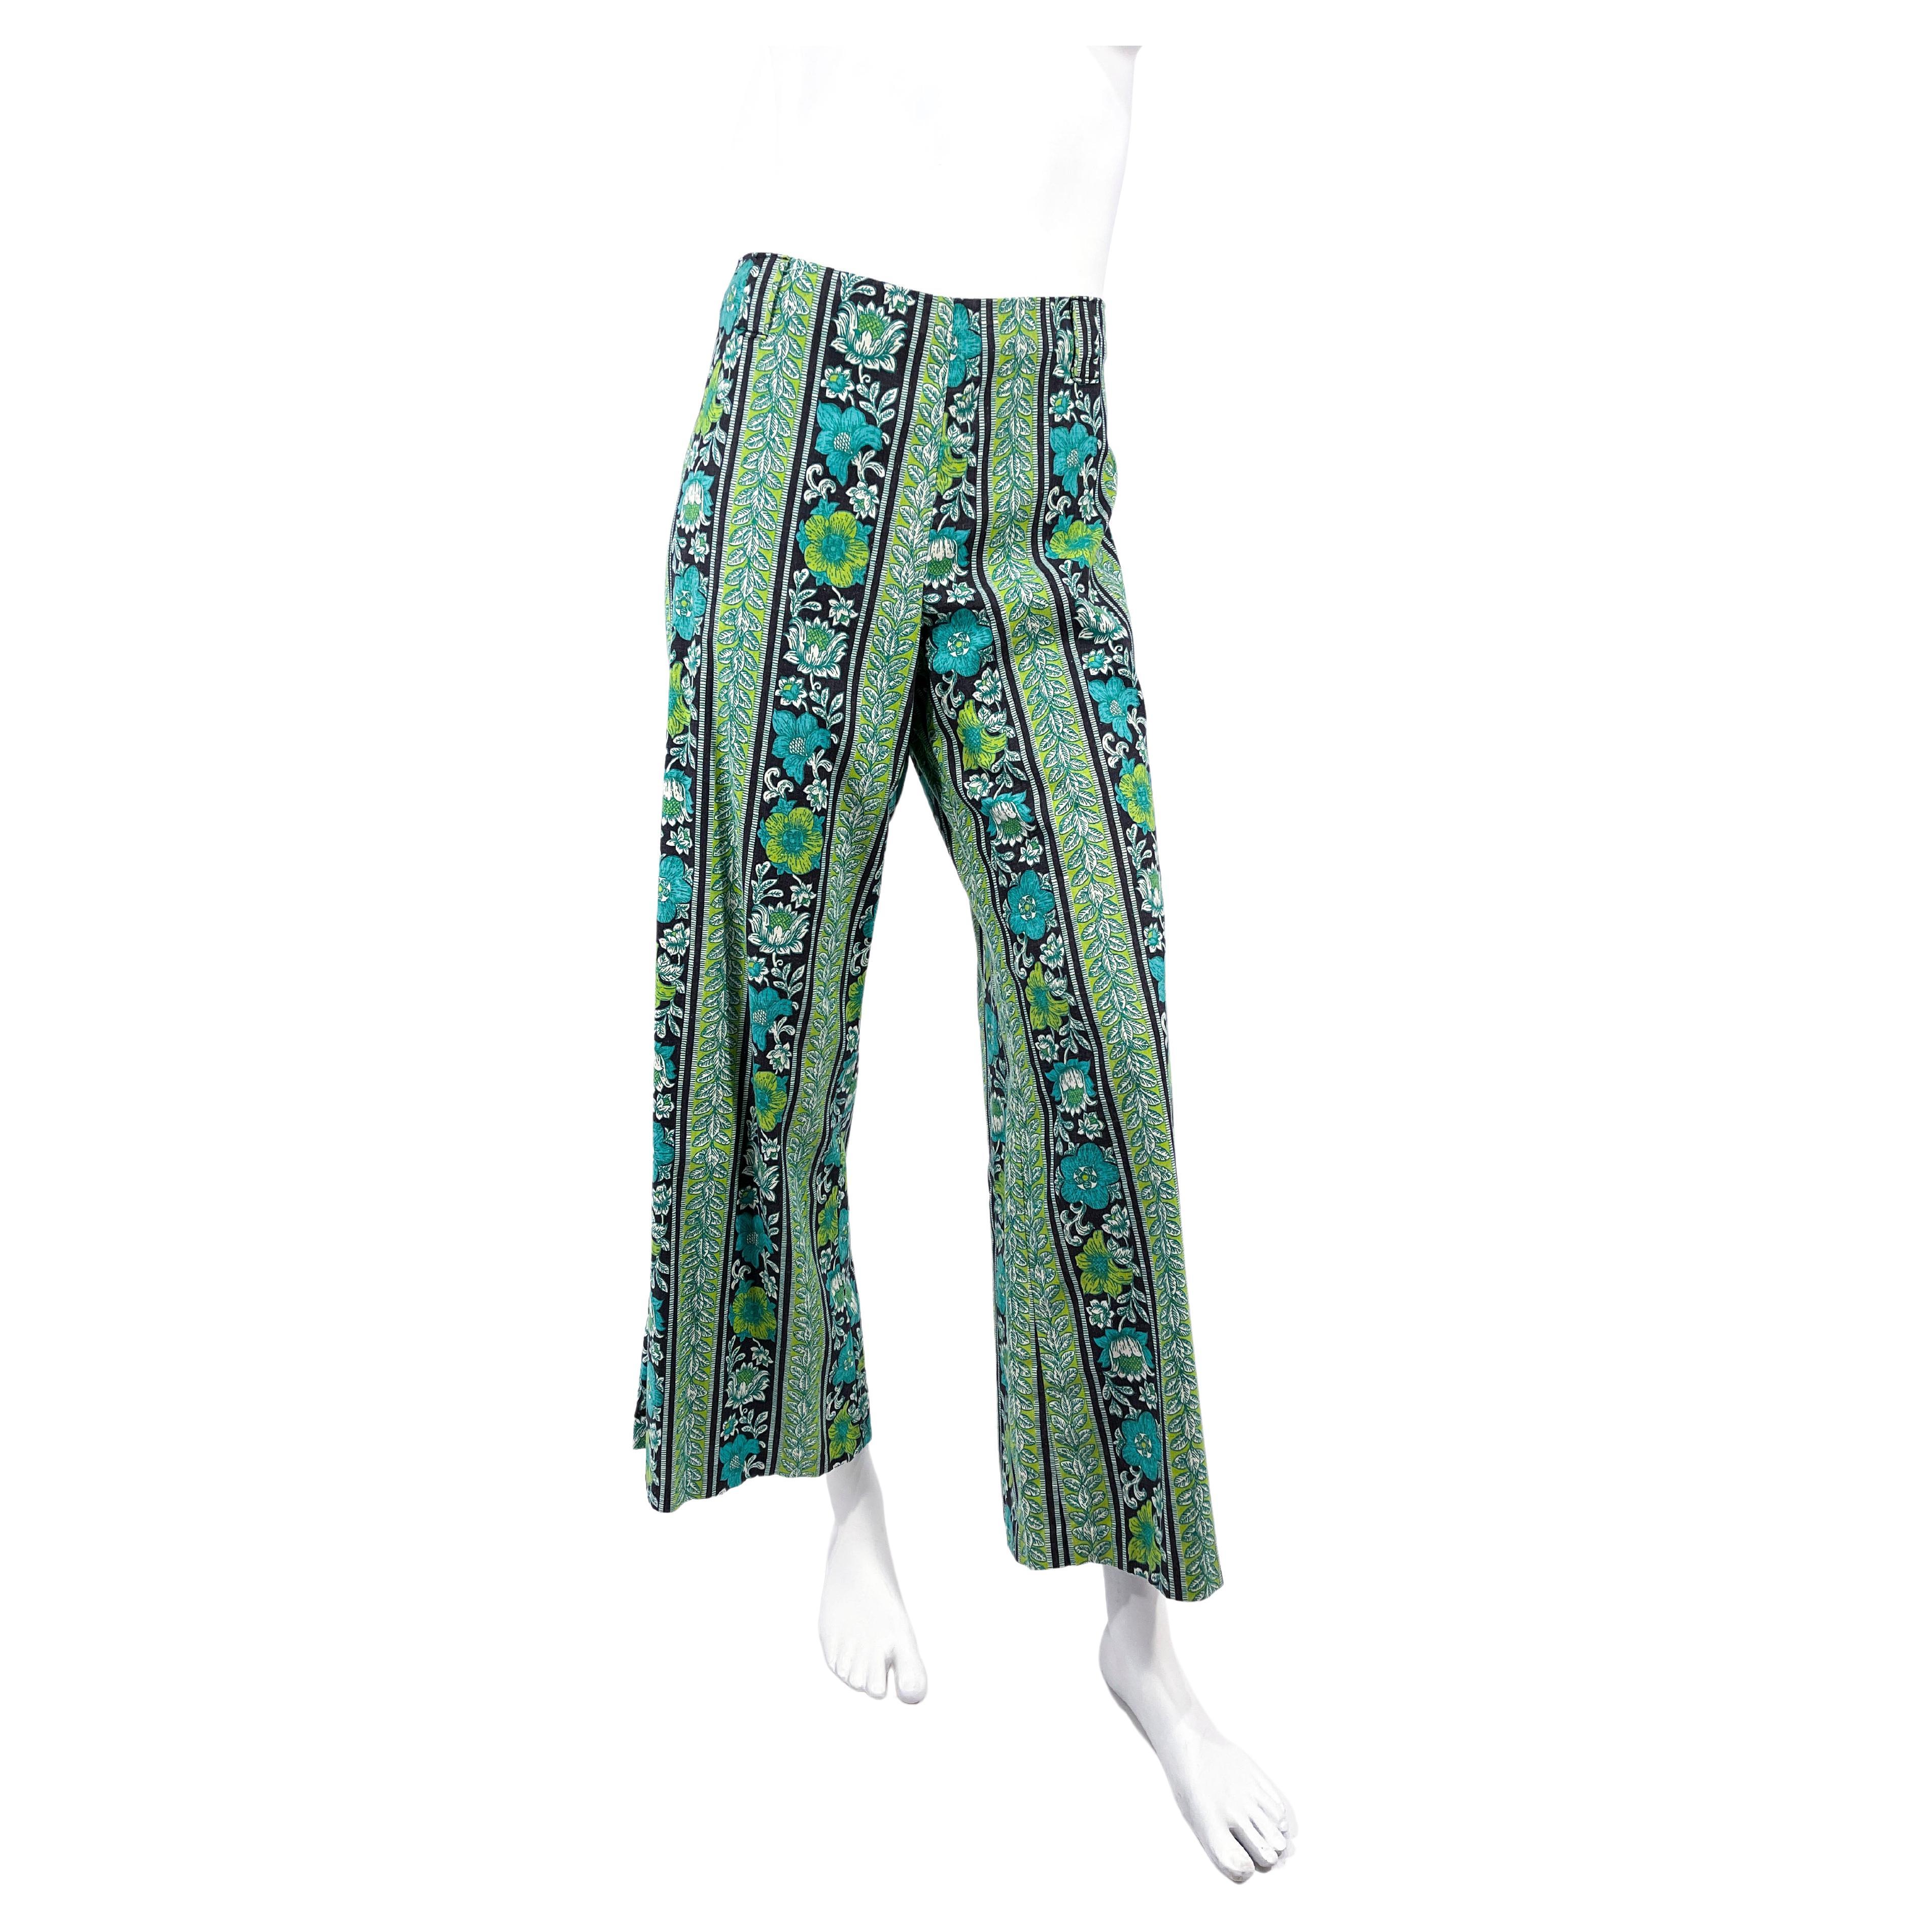 1960s Psychedelic Printed Flared Hip Hugger Pants For Sale